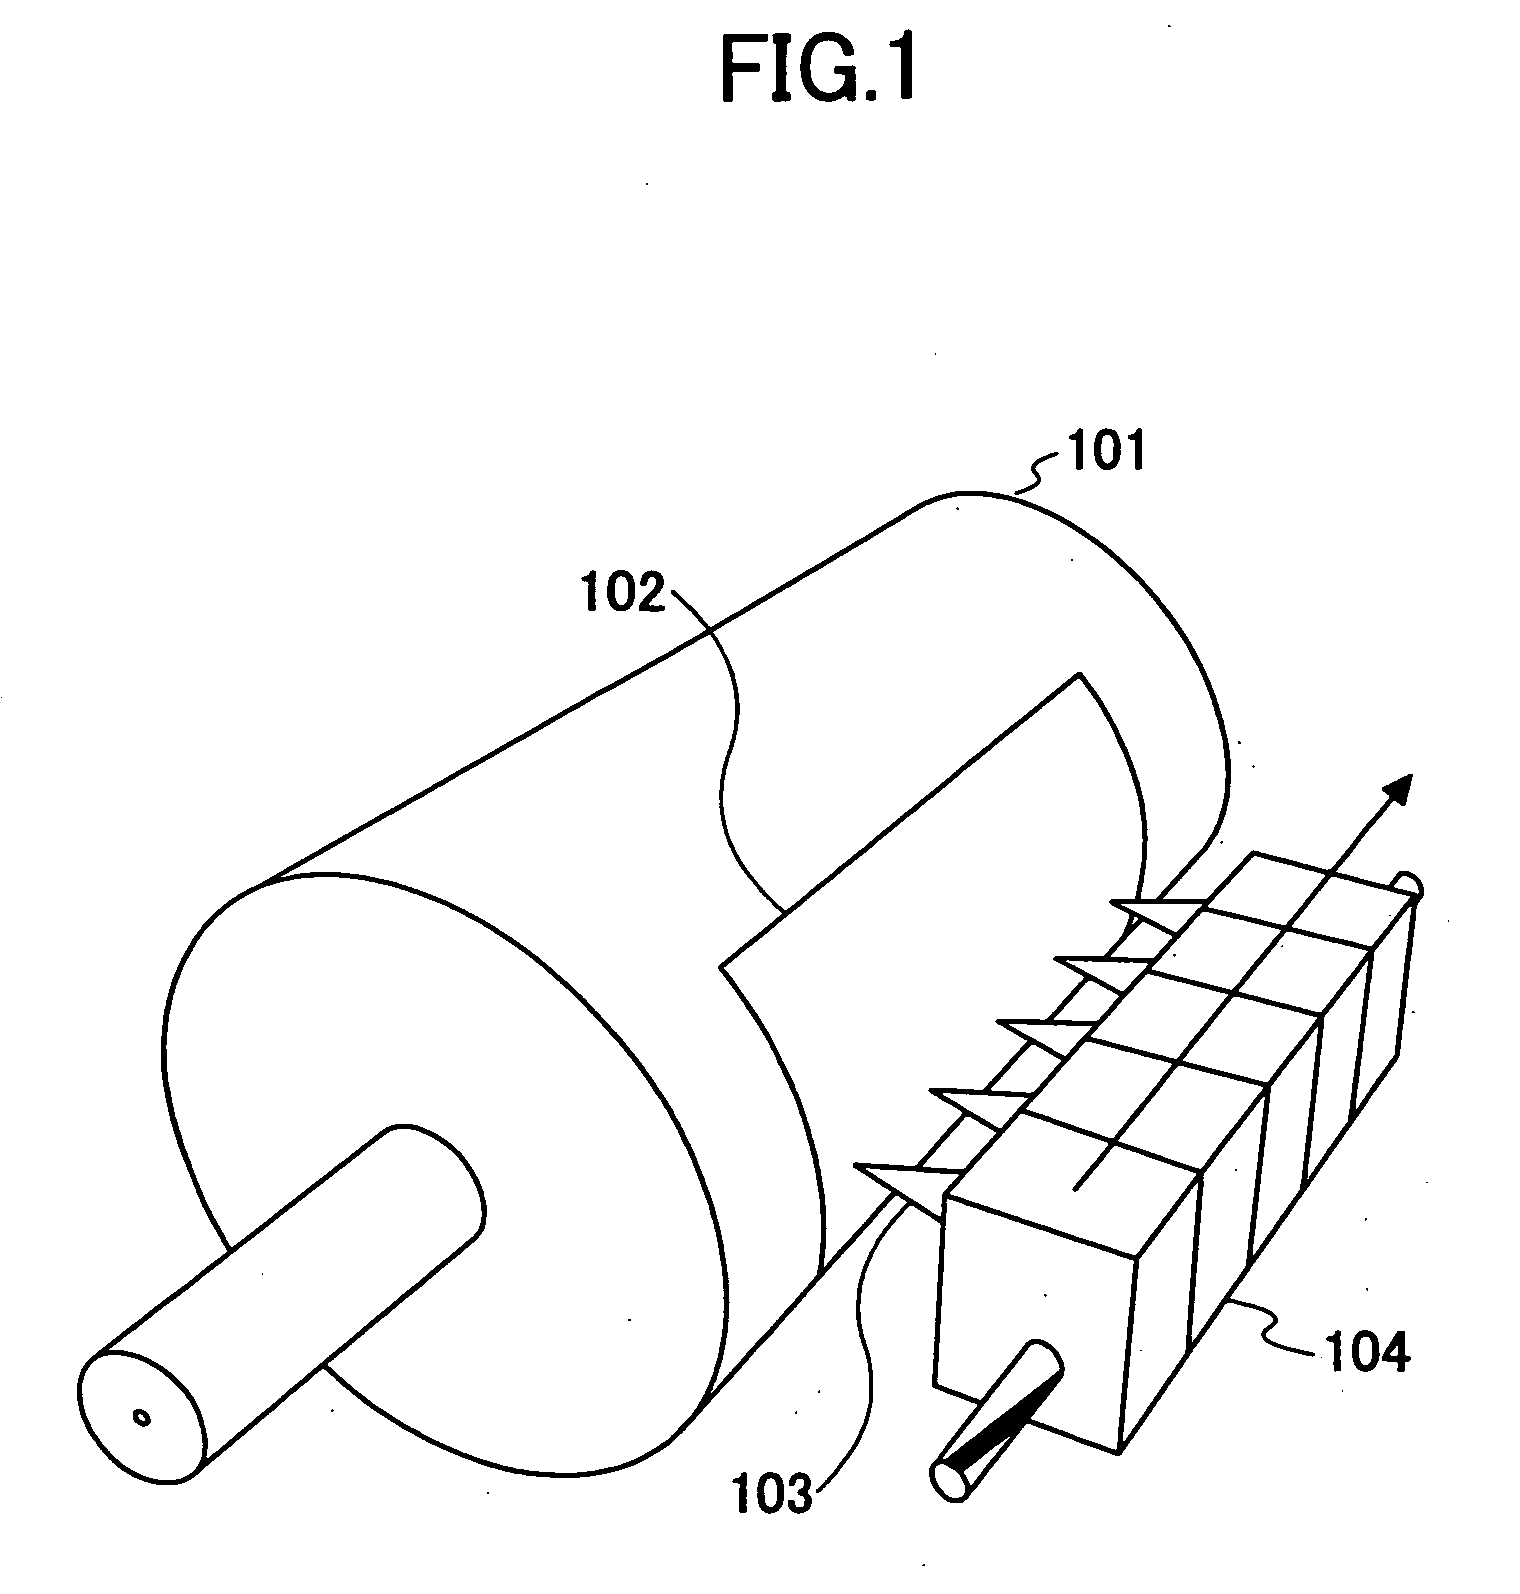 Image forming method and apparatus, and a recording medium storing a program for performing an image forming method